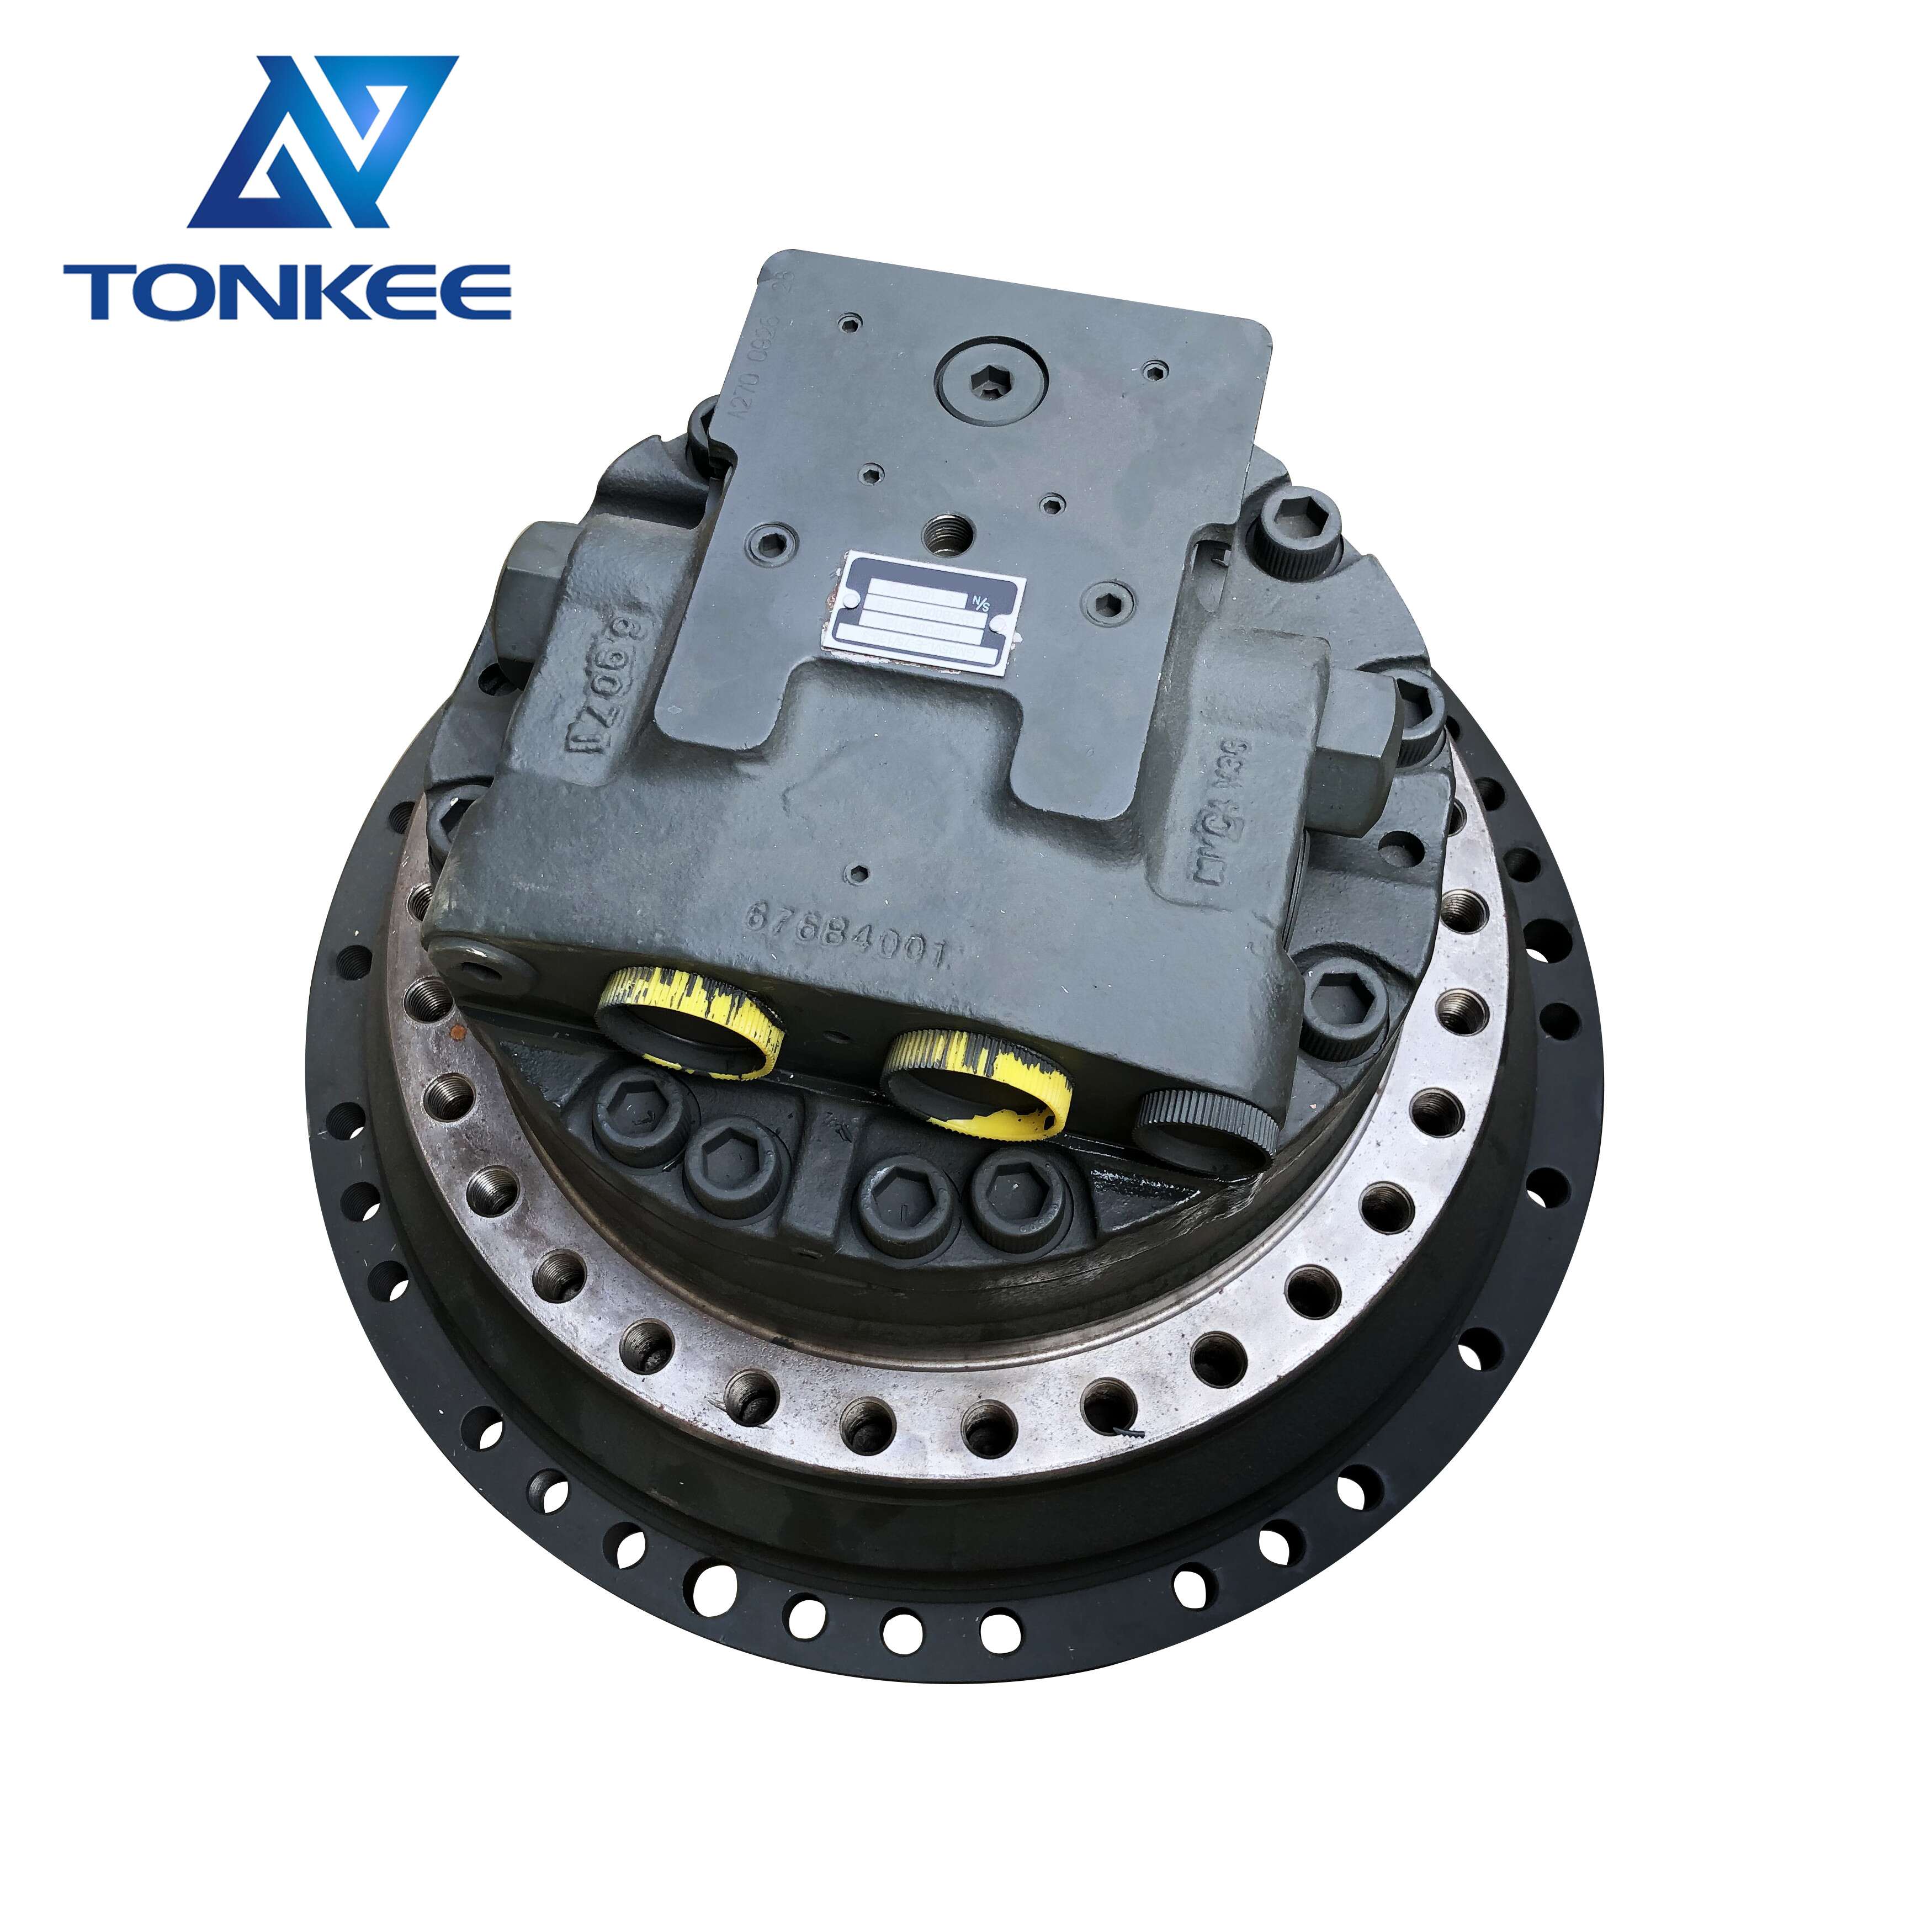 B220501000267 GM35VL-E-75130-3 GM35VL NABTESCO final drive group assy SY210 SY215 SY230 SY235 SY240 excavator travel motor assembly suitable for SANY 